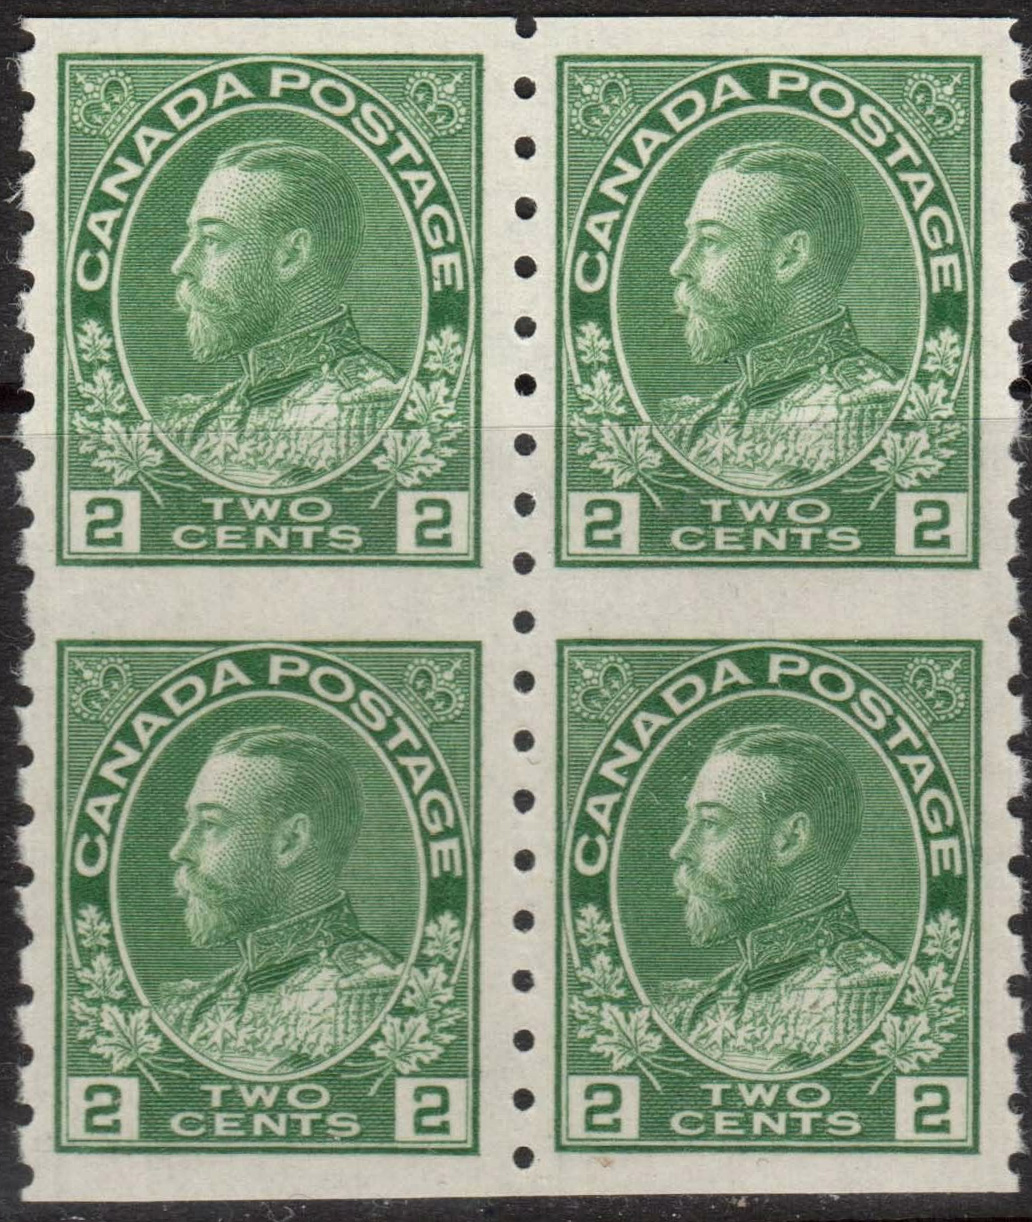 King Georges V - 2 cents 1922 - Canadian stamp - Block of 4 - 128a